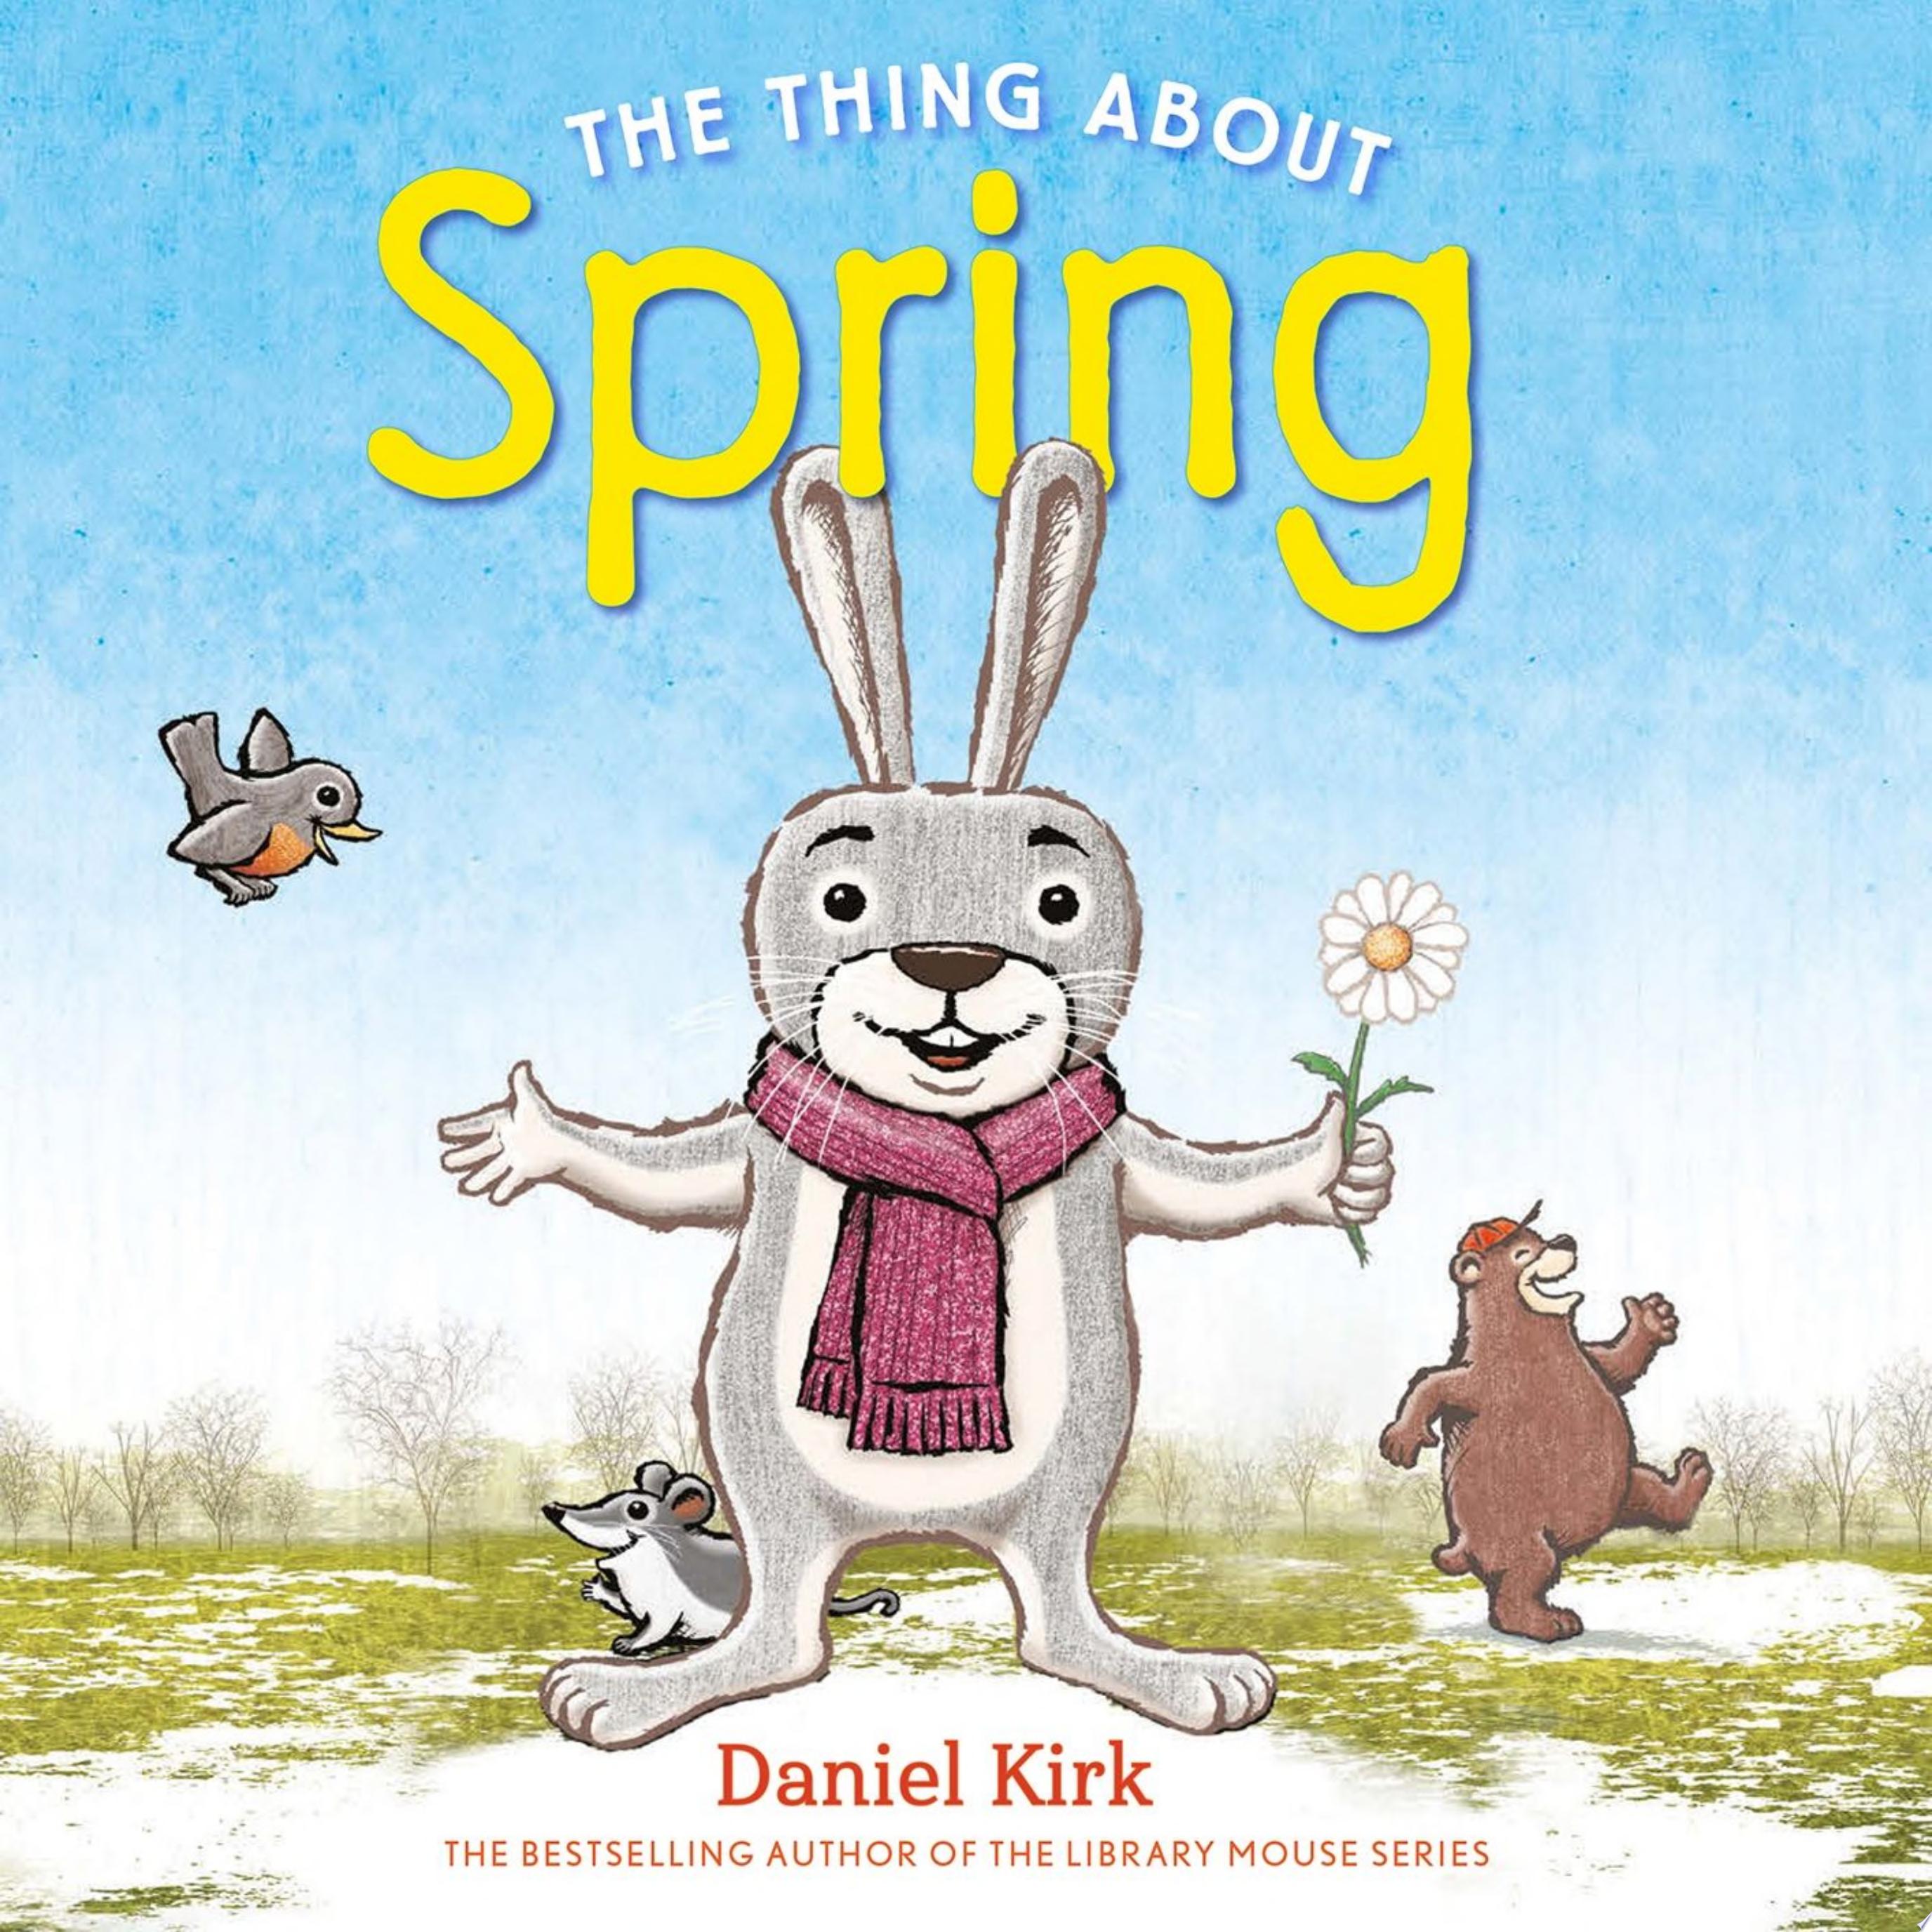 Image for "The Thing About Spring"